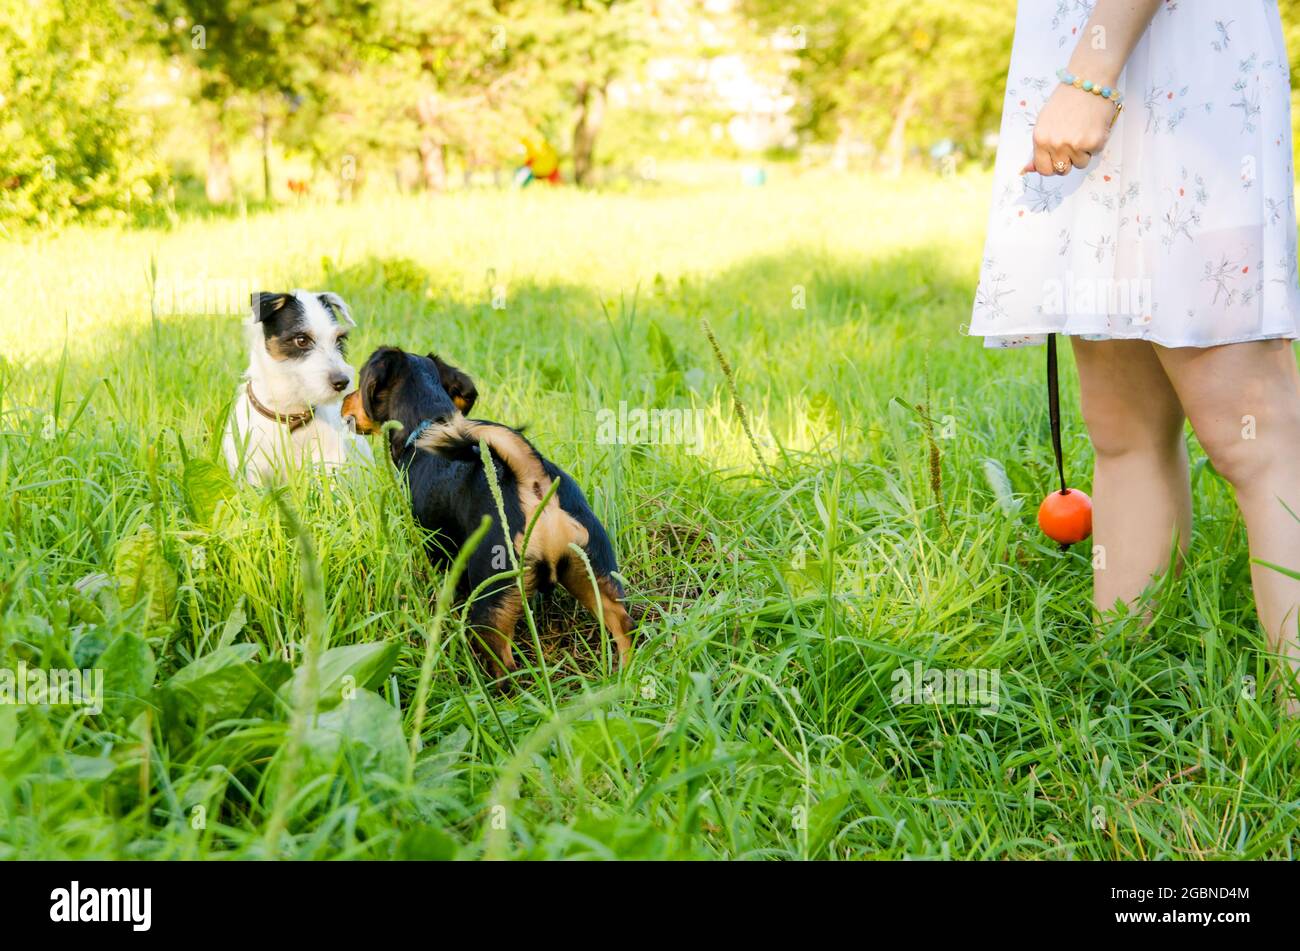 Two small dogs met for a walk and get to know each other. Stock Photo